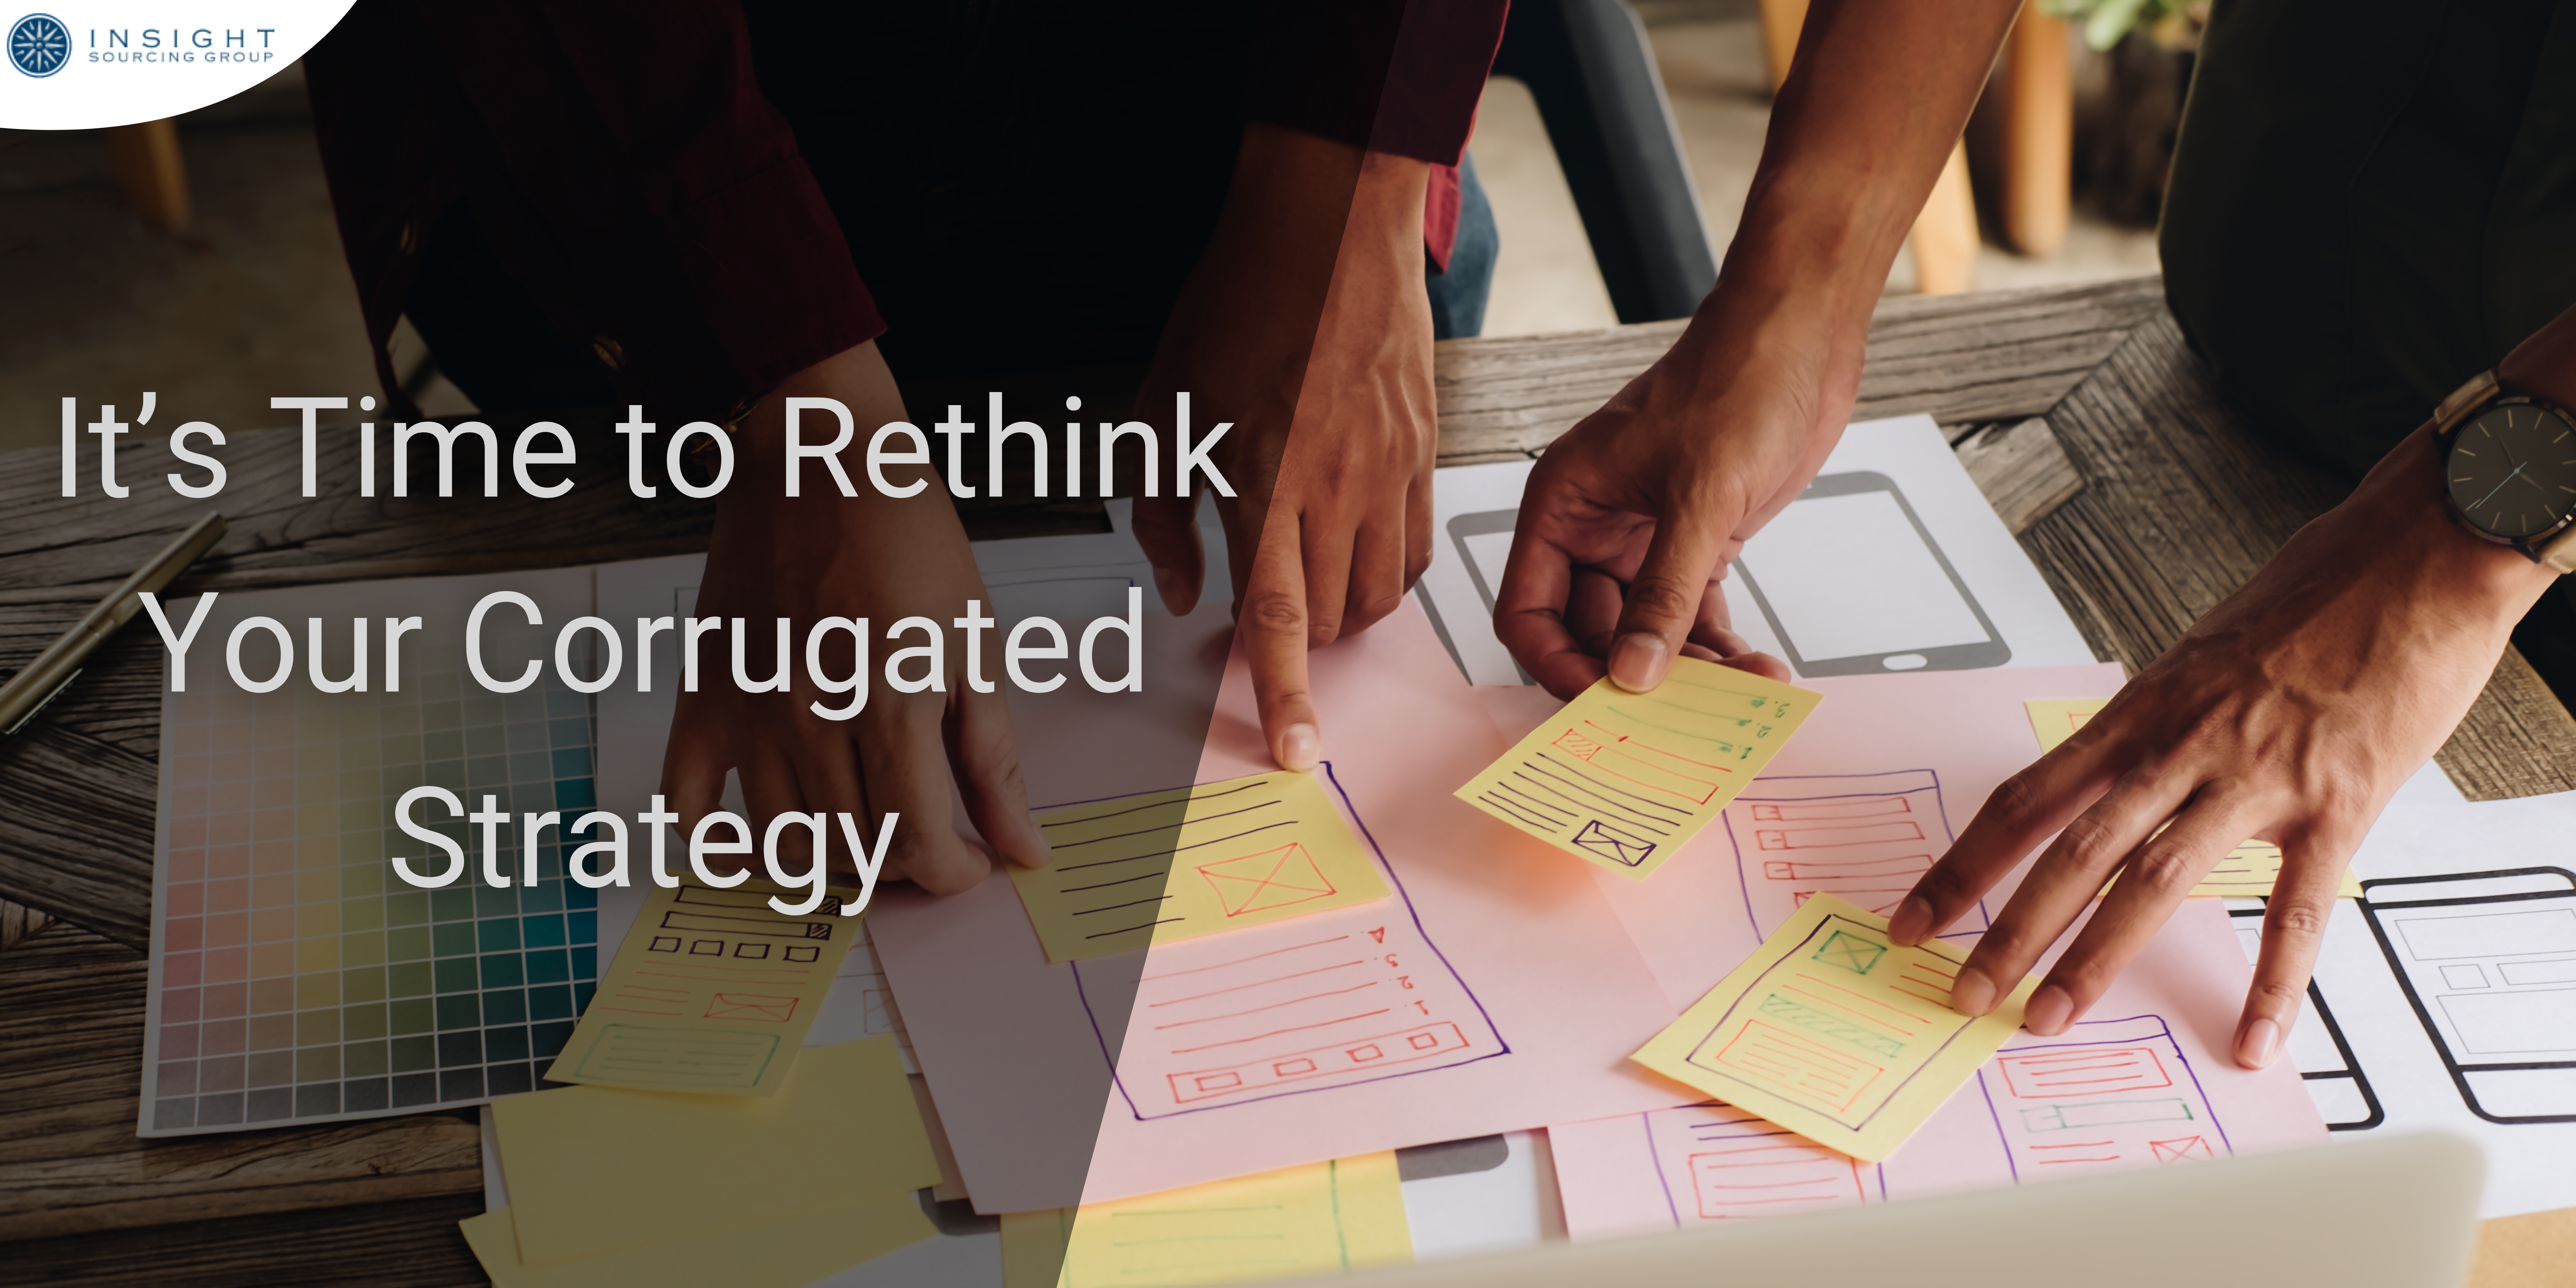 It’s Time to Rethink Your Corrugated Strategy